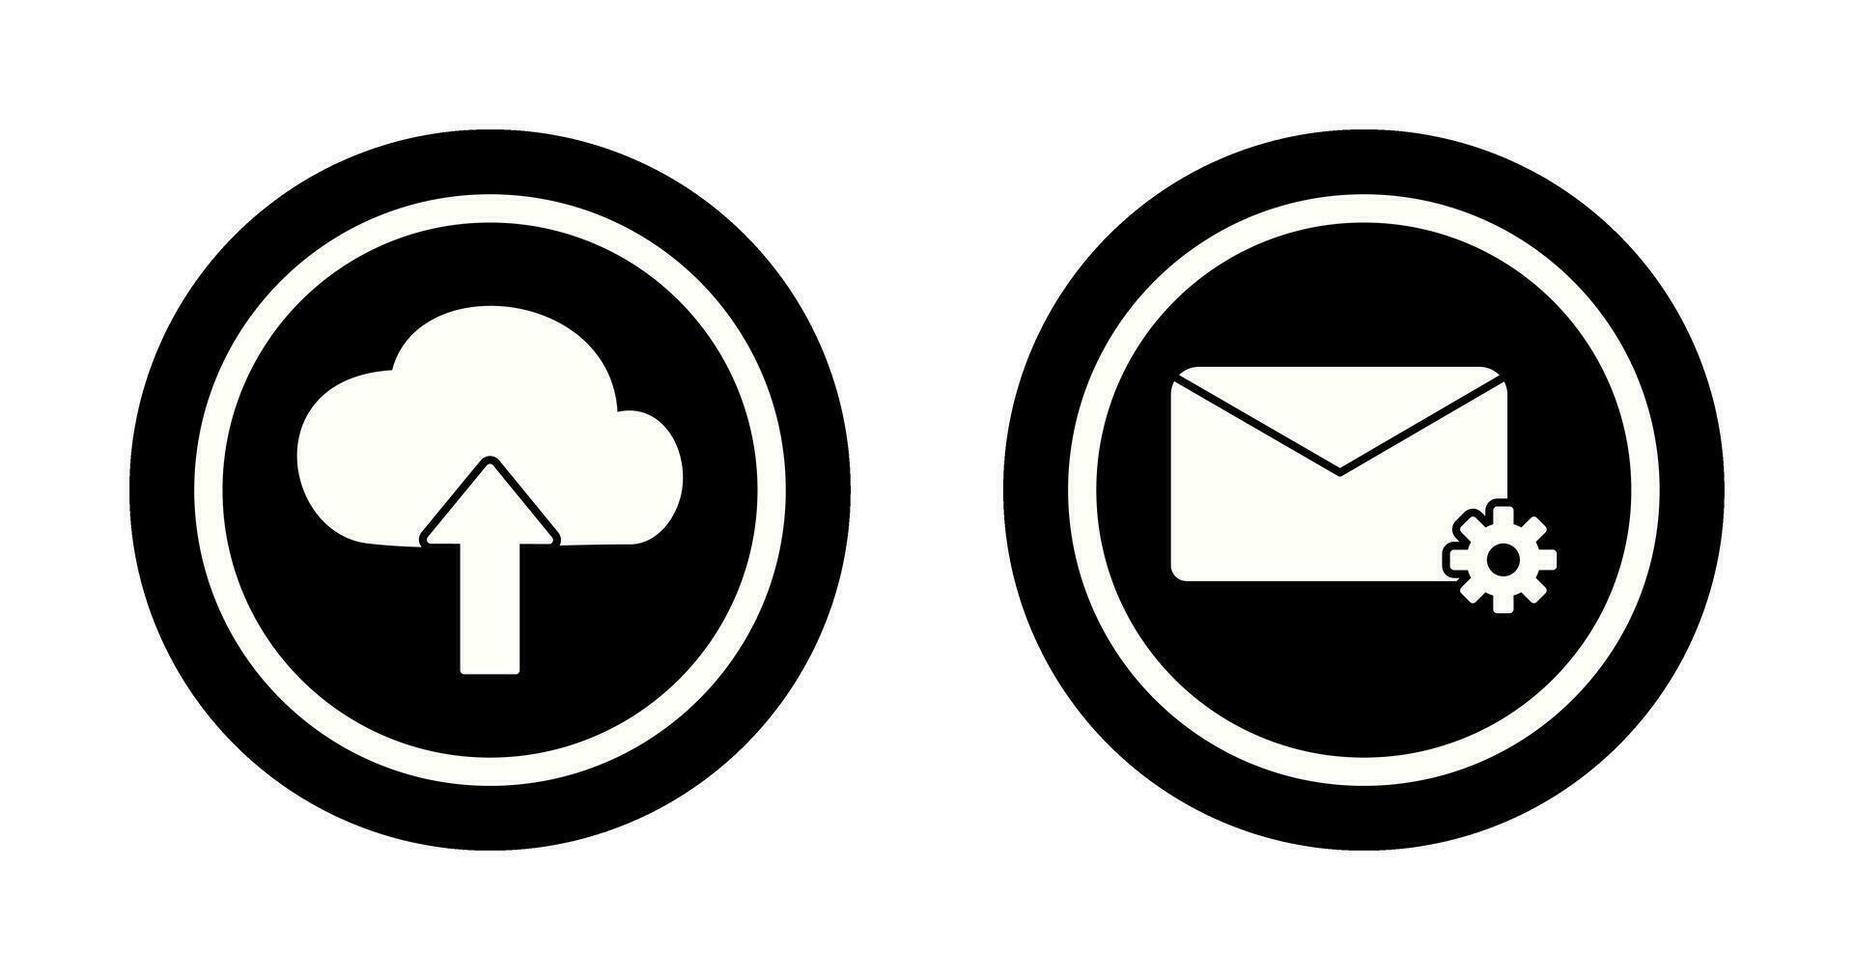 Upload to Cloud and Message Settings Icon vector